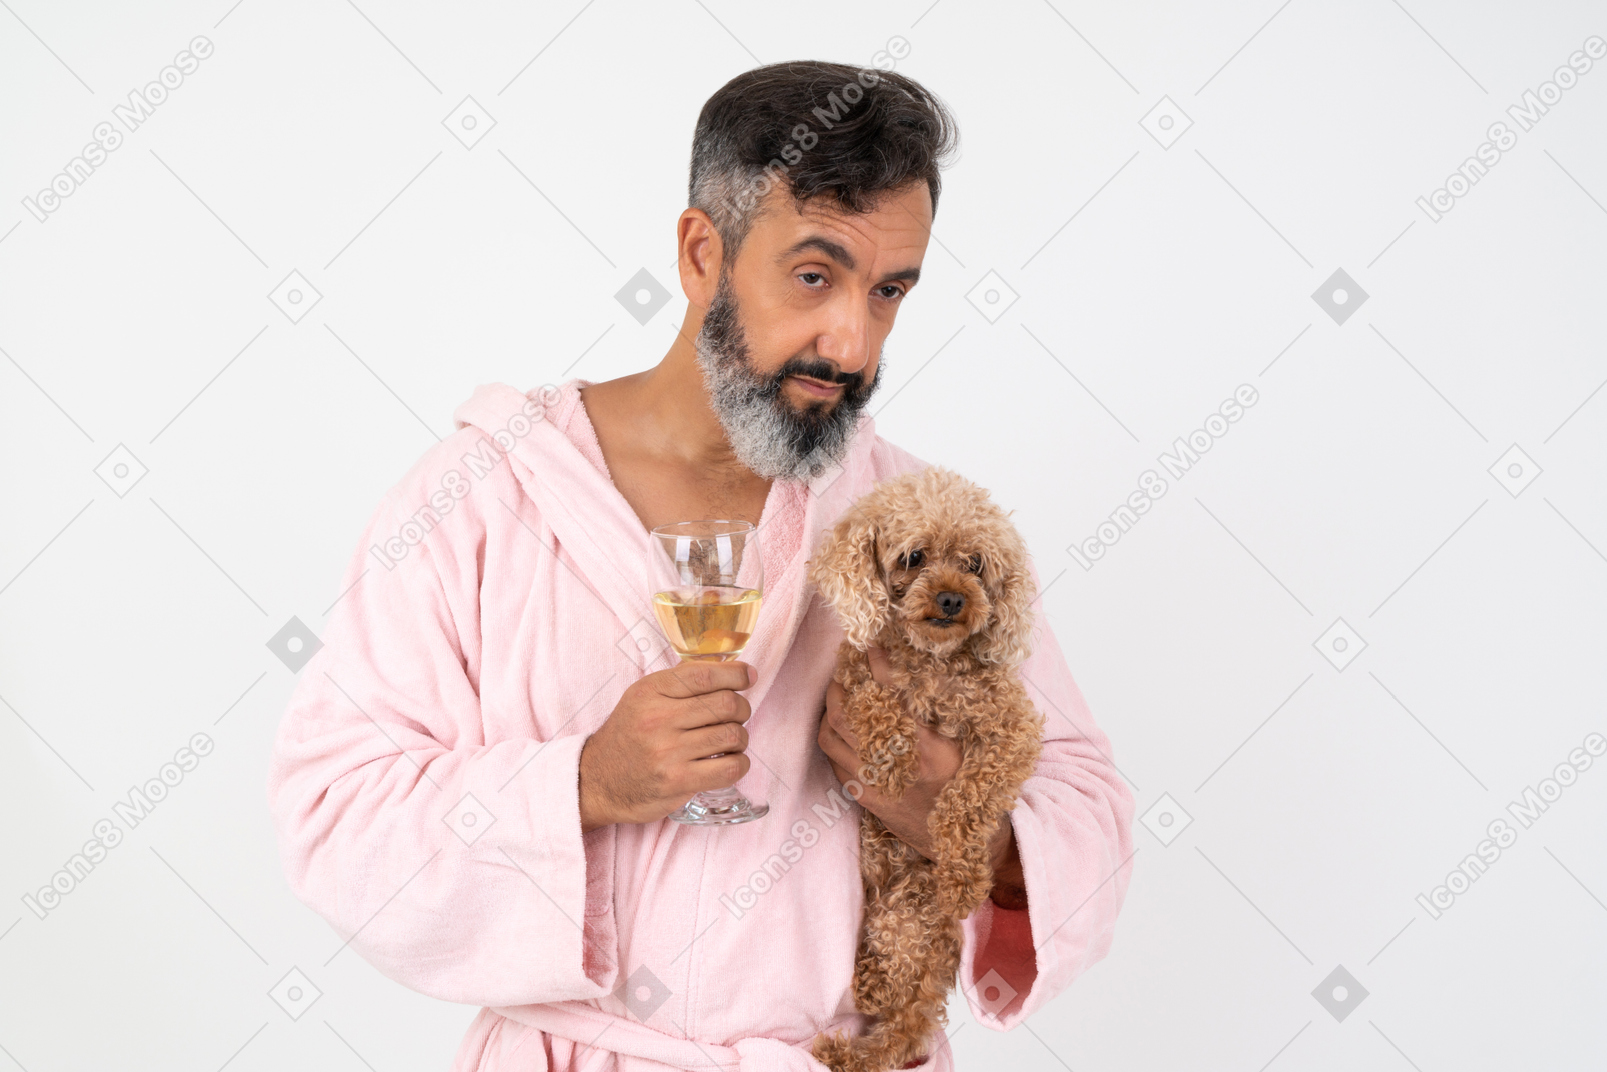 Mature man holding a wine glass and a puppy